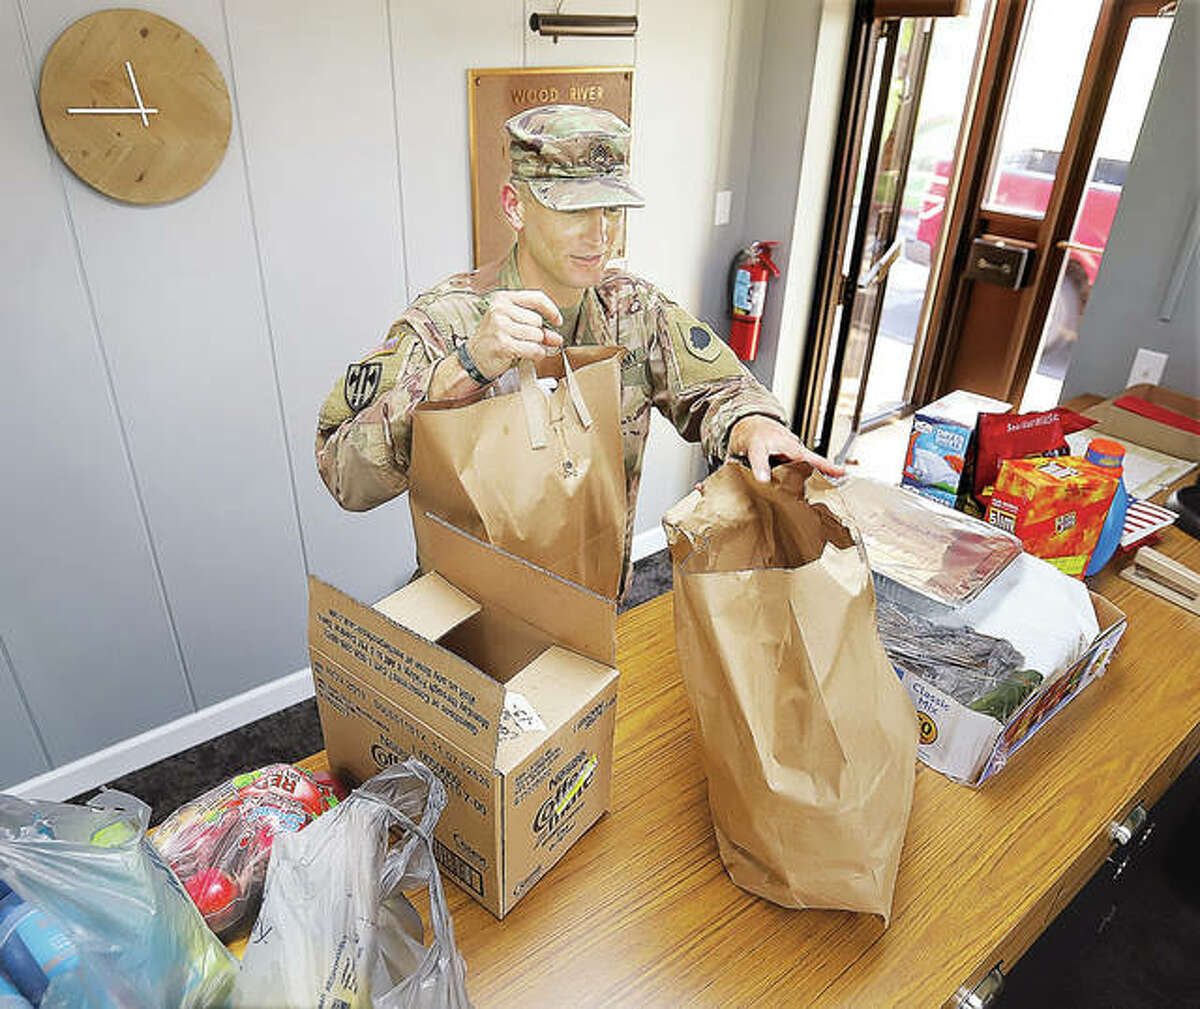 Illinois National Guard Staff Sgt. Josh Griffen picks up lunch for himself and his men Wednesday at the offices of the Wood River Levee District. Riverbend Family Ministries in Wood River has been coordinating to collect food for the guard troops who are patroling the length of the levee to protect it from damage and sightseers.